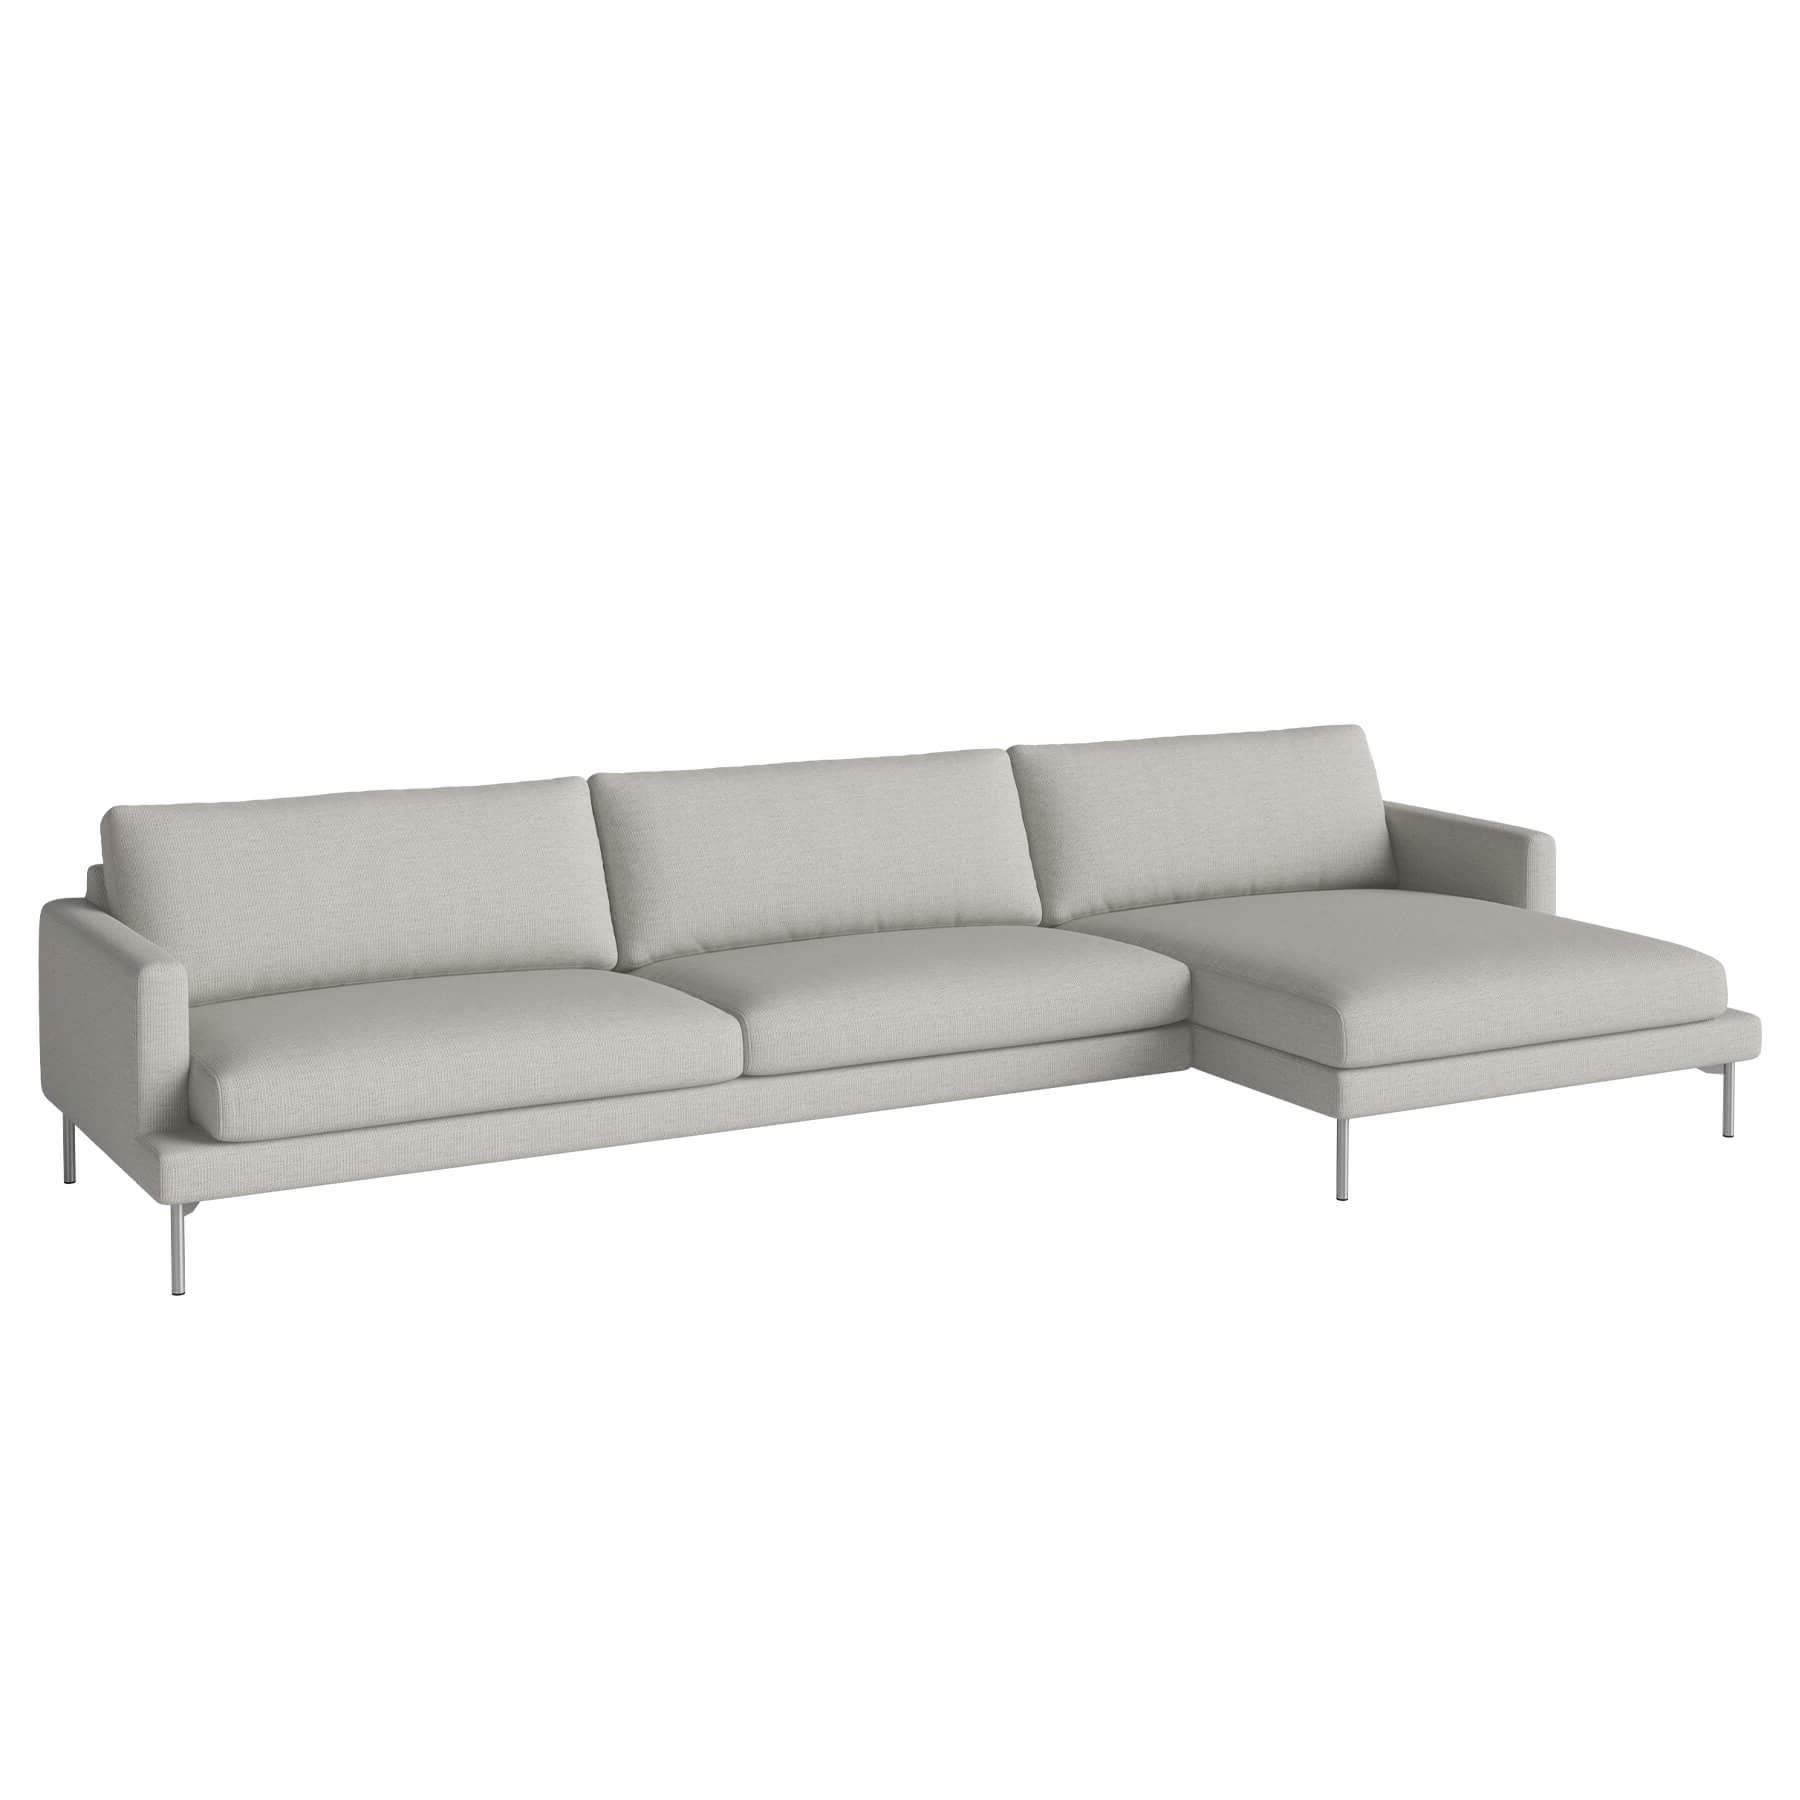 Bolia Veneda Sofa 45 Seater Sofa With Chaise Longue Brushed Steel London Dust Green Right Grey Designer Furniture From Holloways Of Ludlow